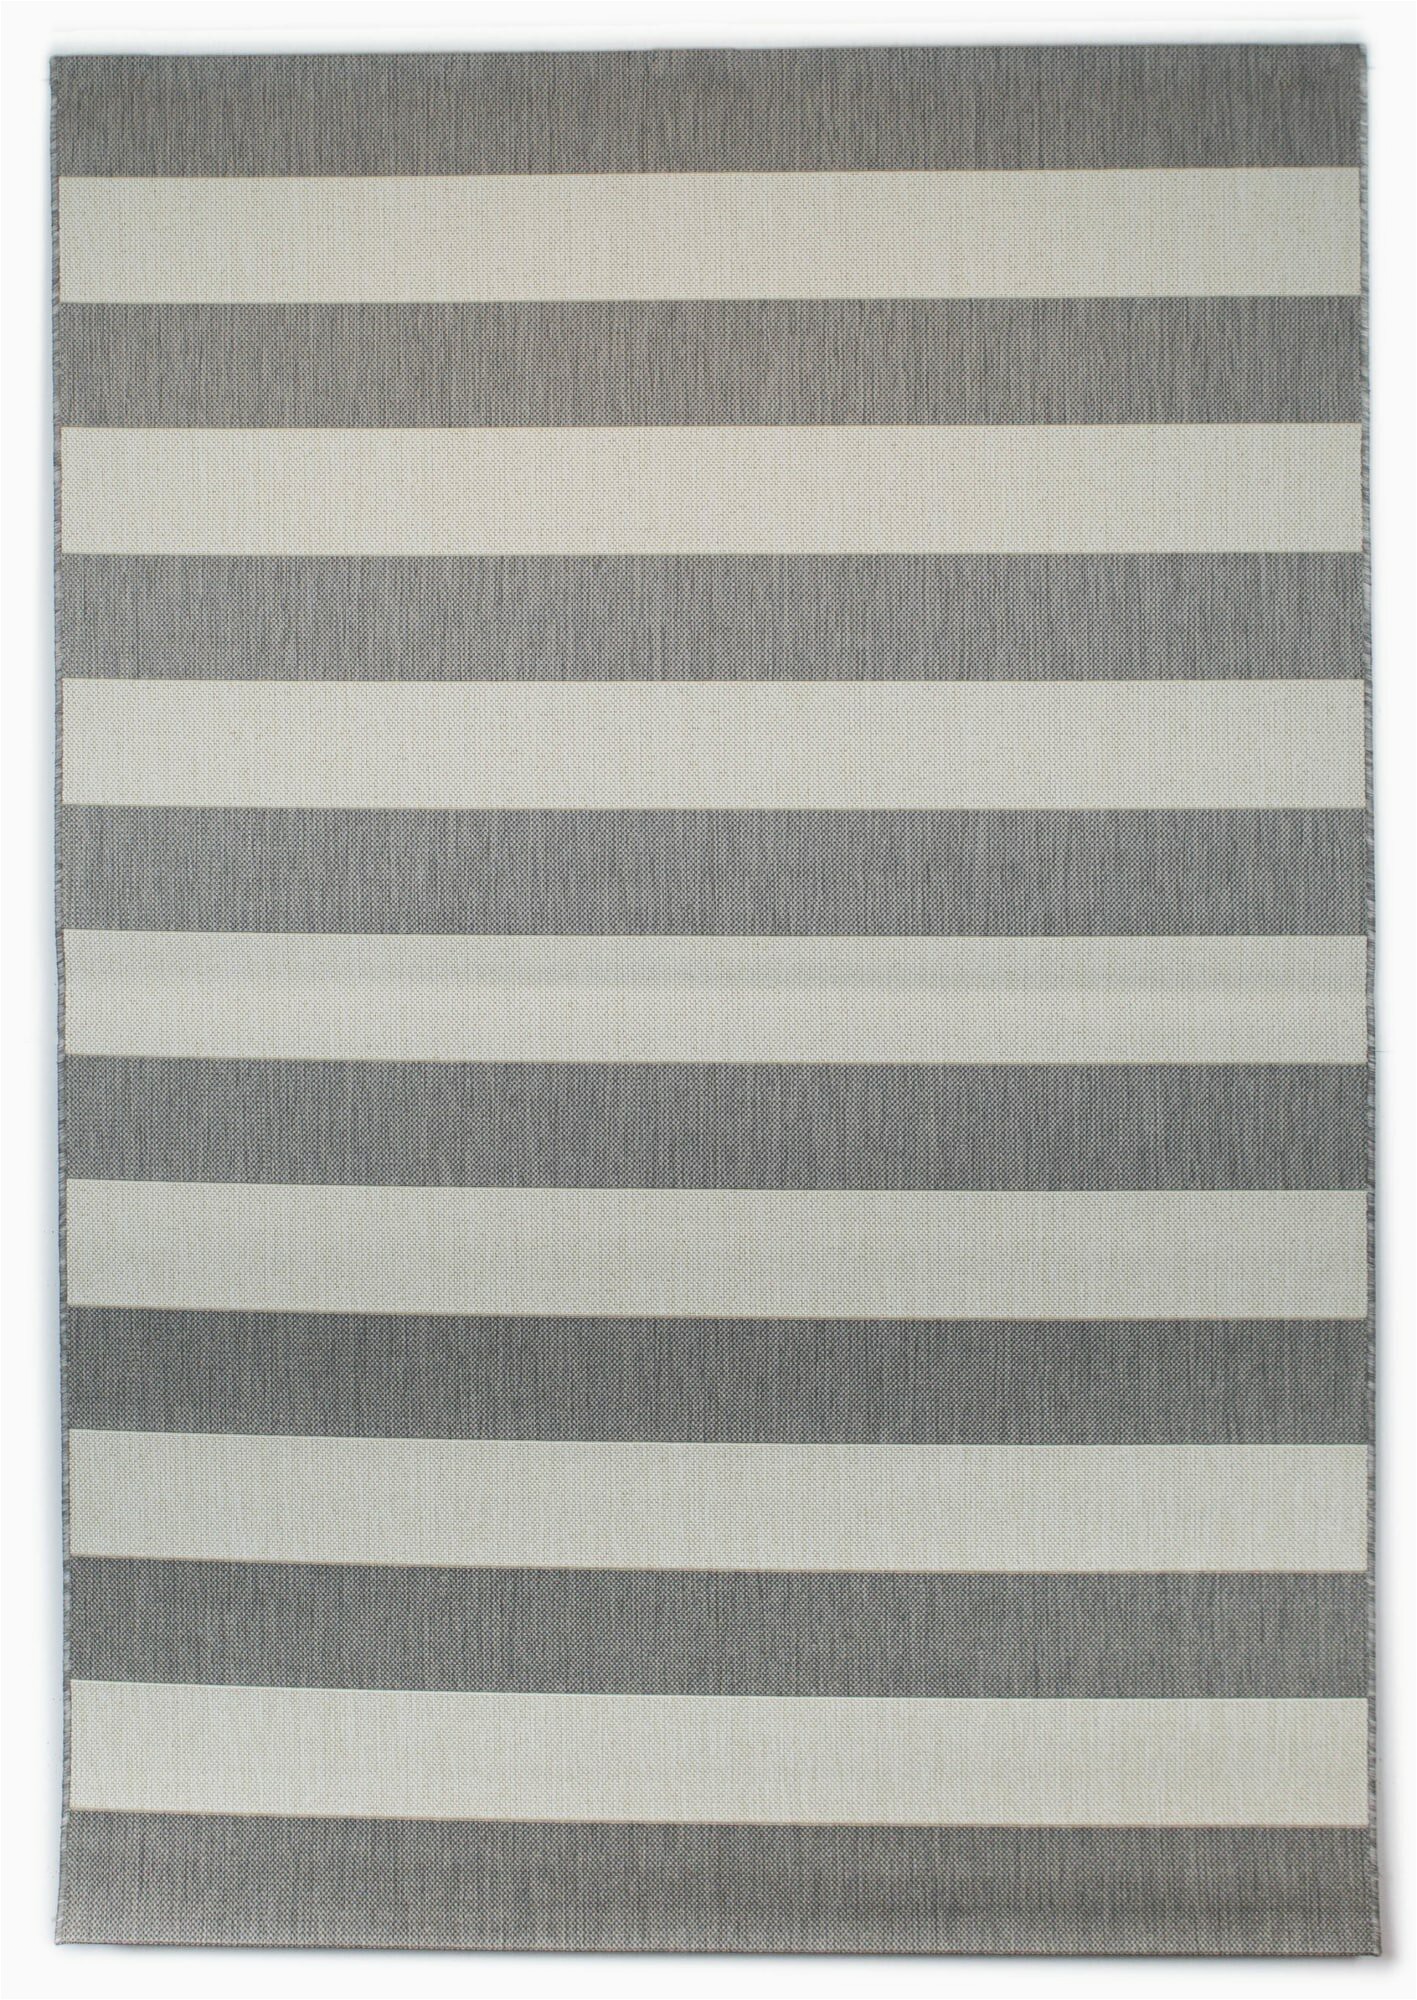 Grey and White Striped area Rug Gonsalez Striped Gray White Indoor Outdoor area Rug